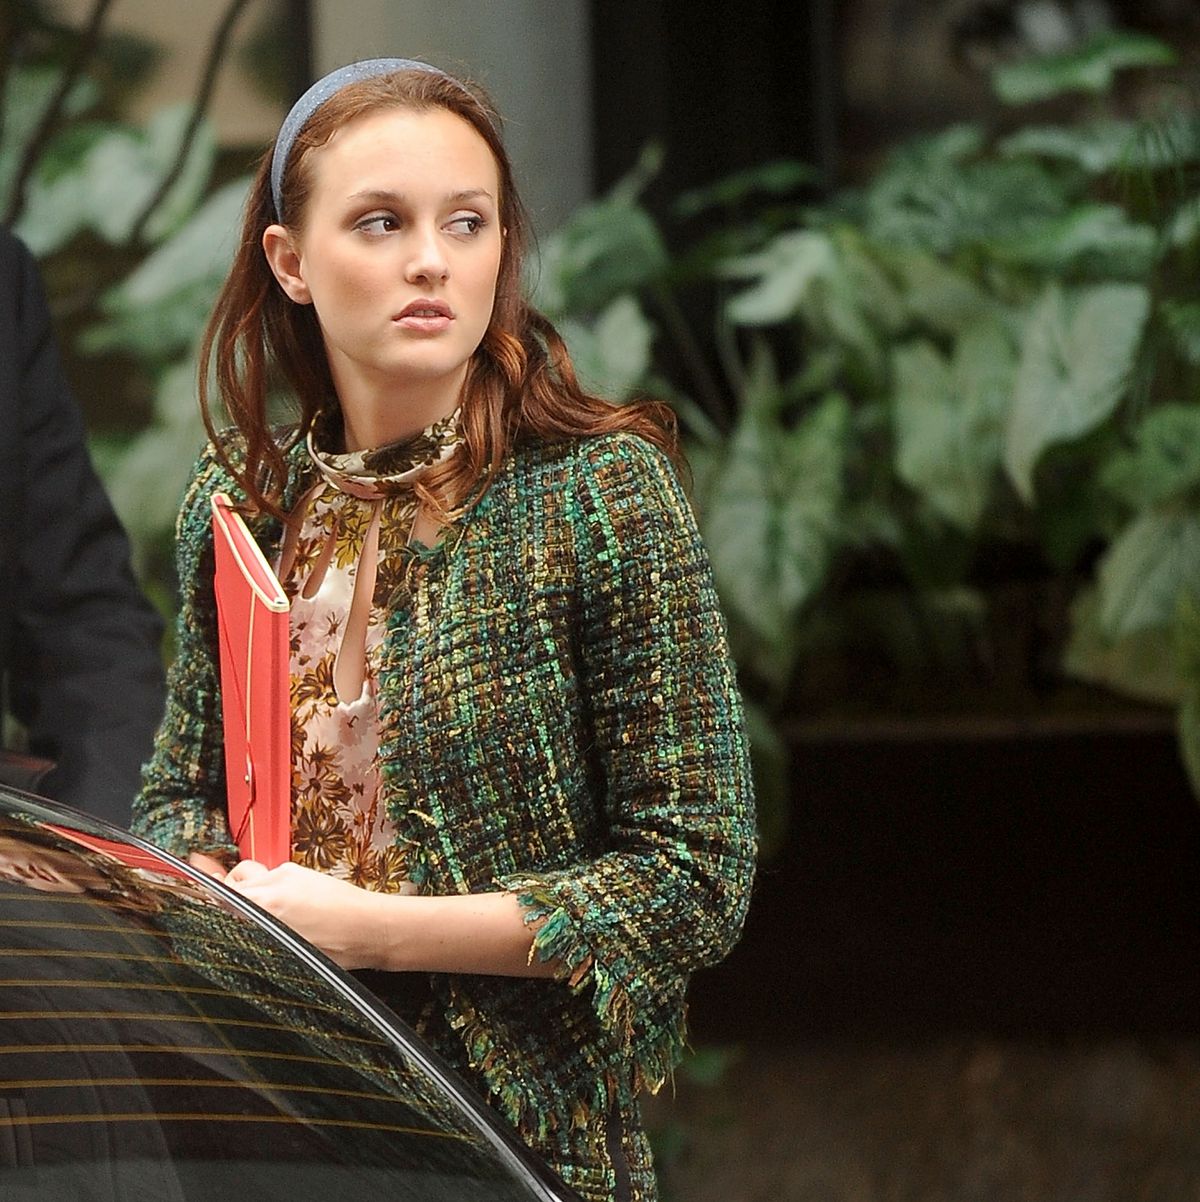 Leighton Meester Says the 'Gossip Girl' Set Wasn't the 'Healthiest  Environment' - Leighton on Playing Blair Waldorf in 20s